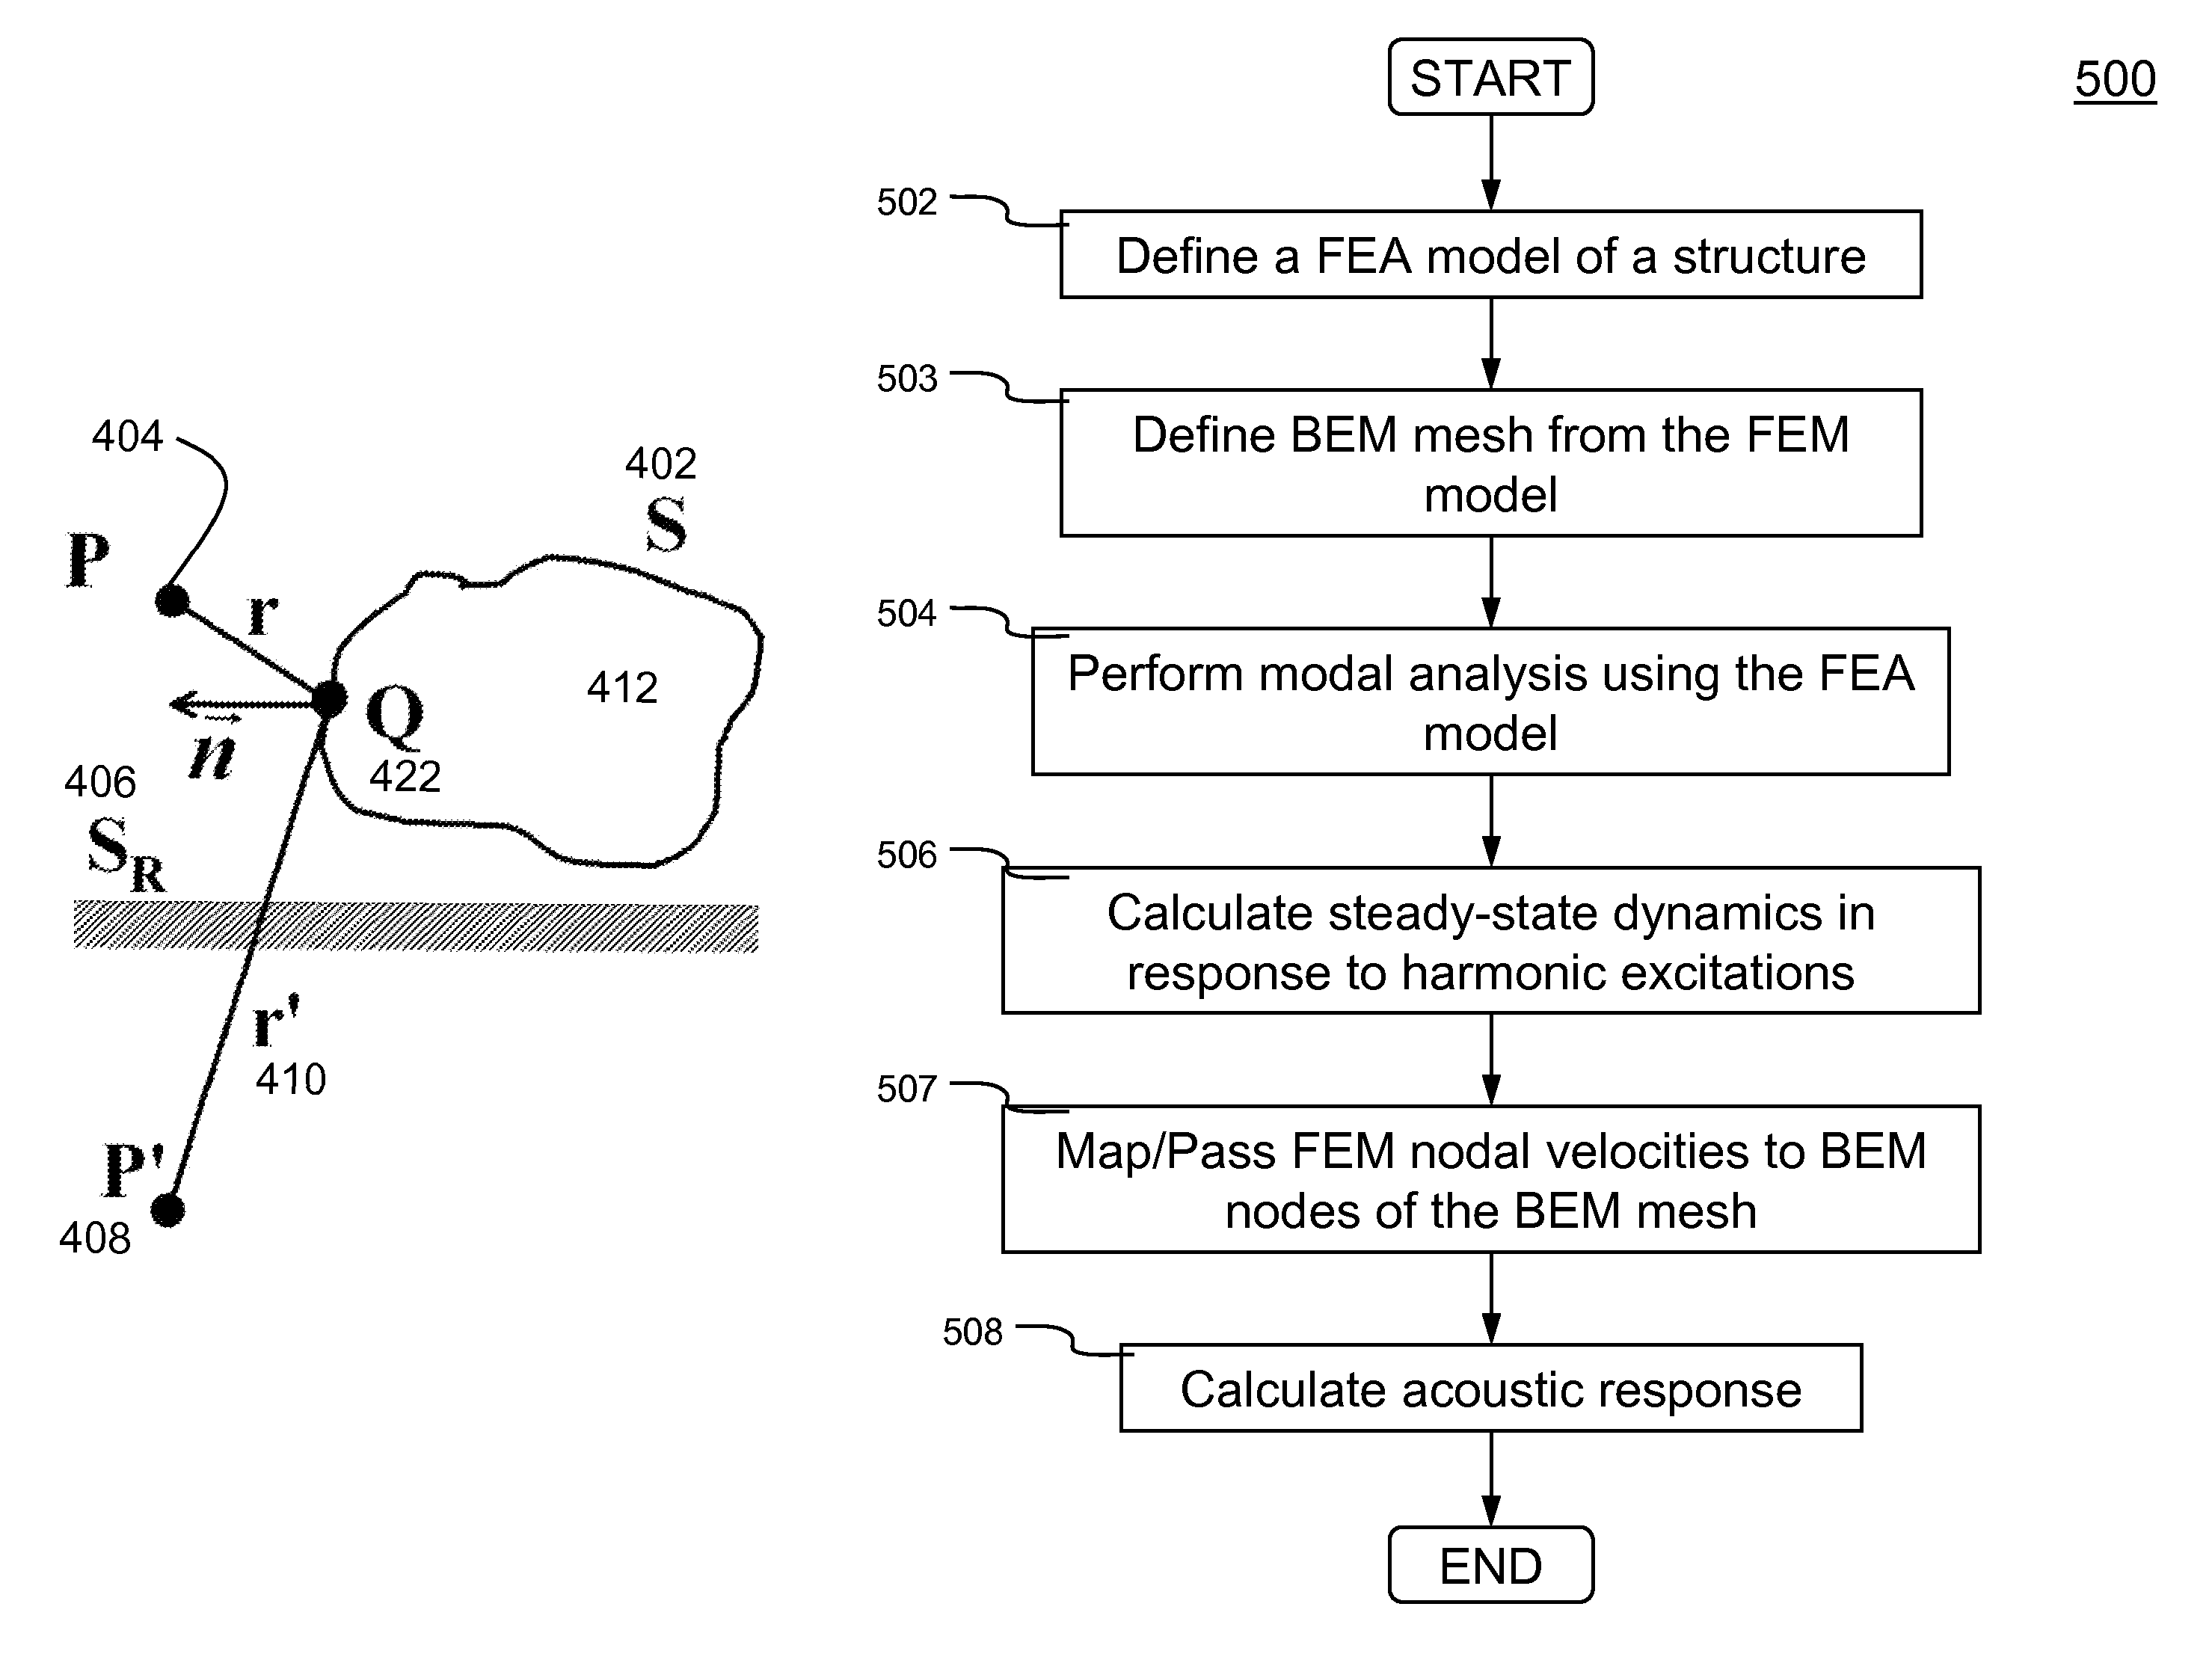 Systems and methods of performing vibro-acoustic analysis of a structure